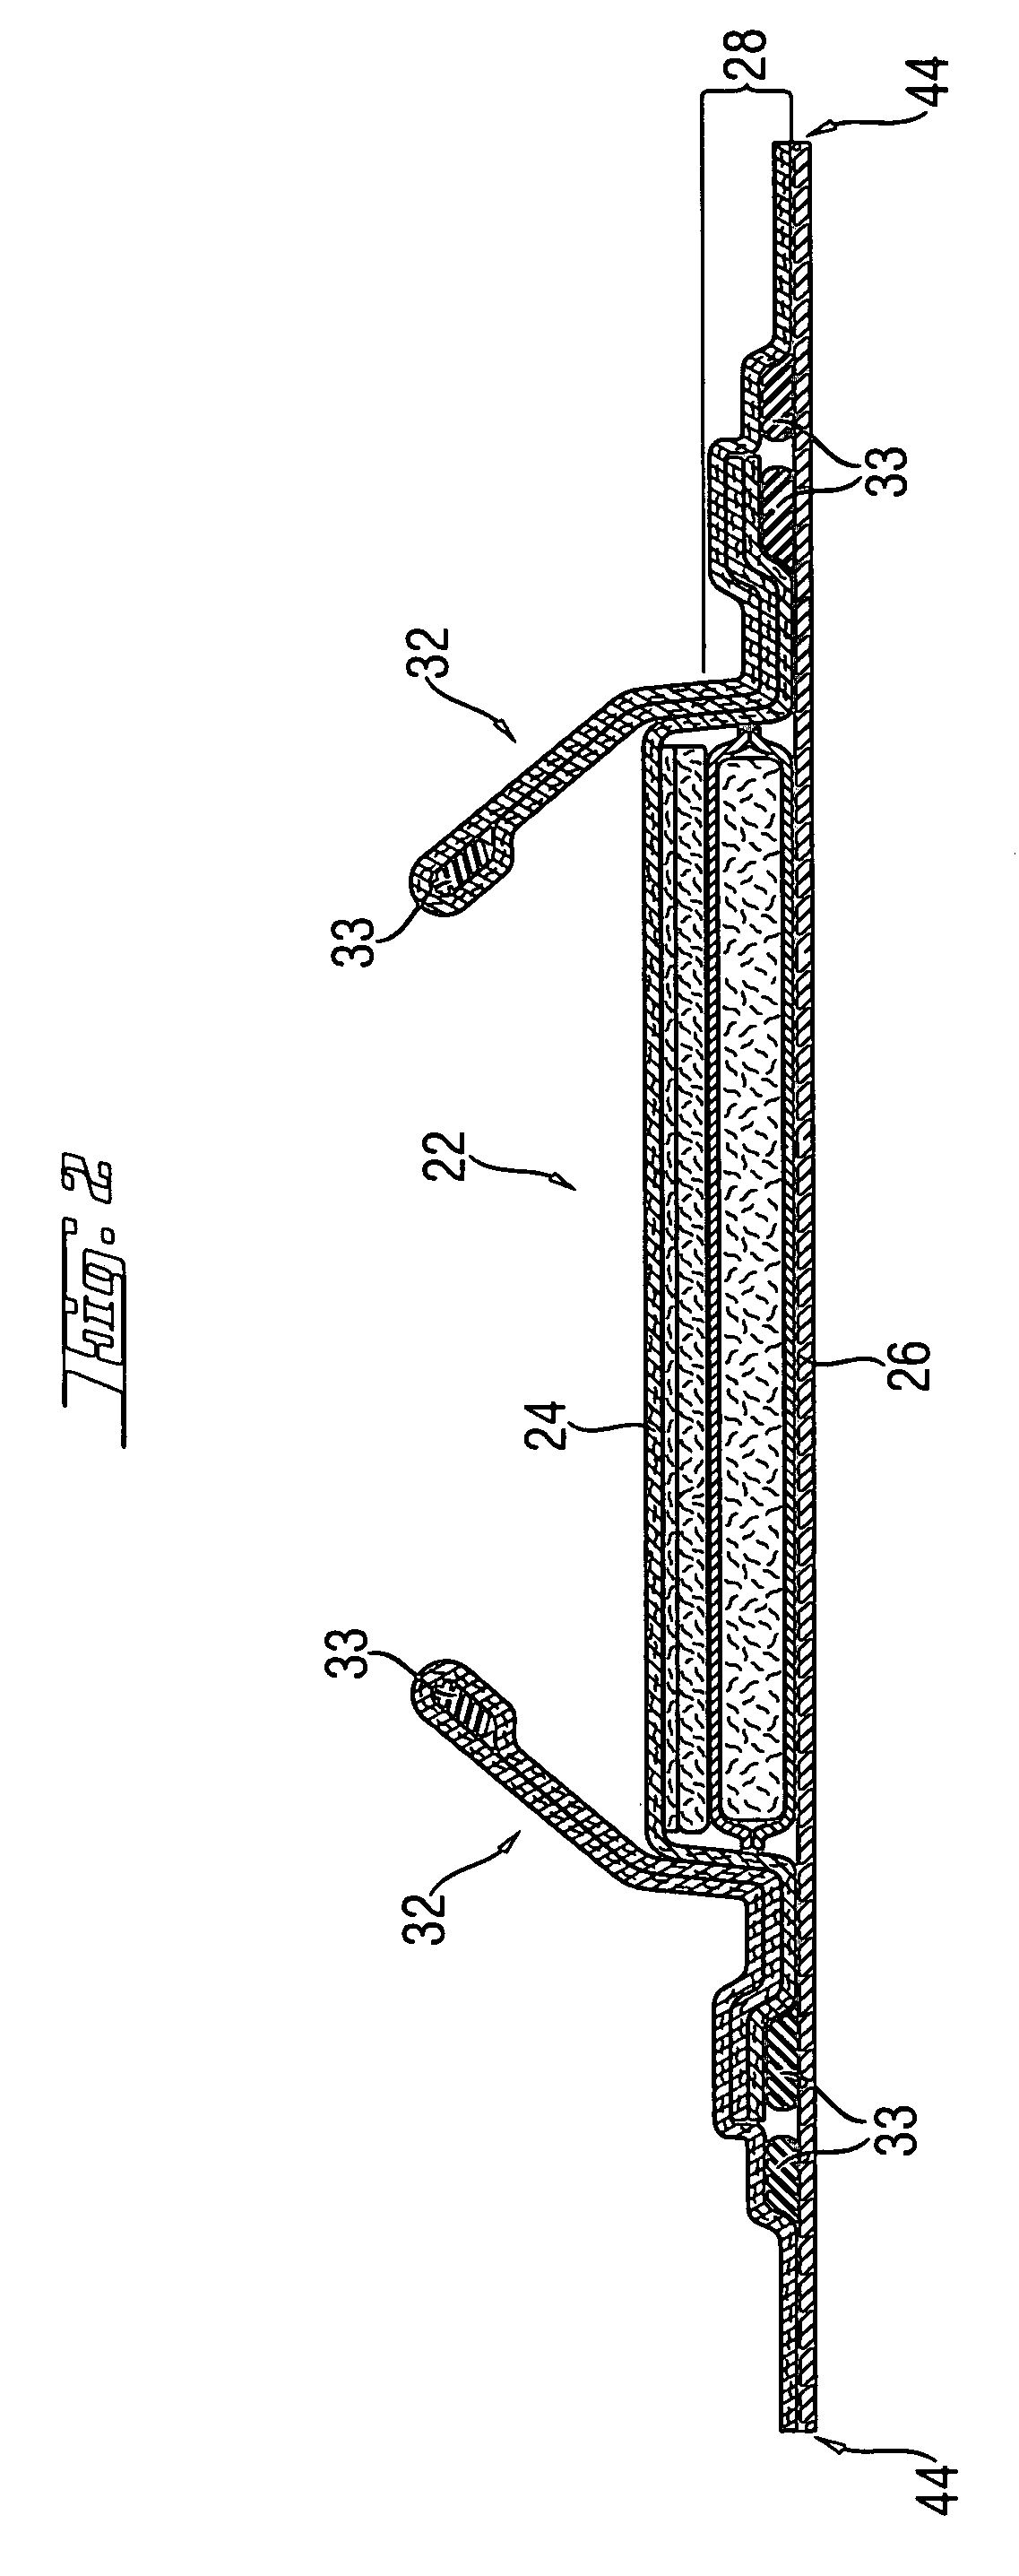 Surface cross-linked superabsorbent polymer particles and methods of making them